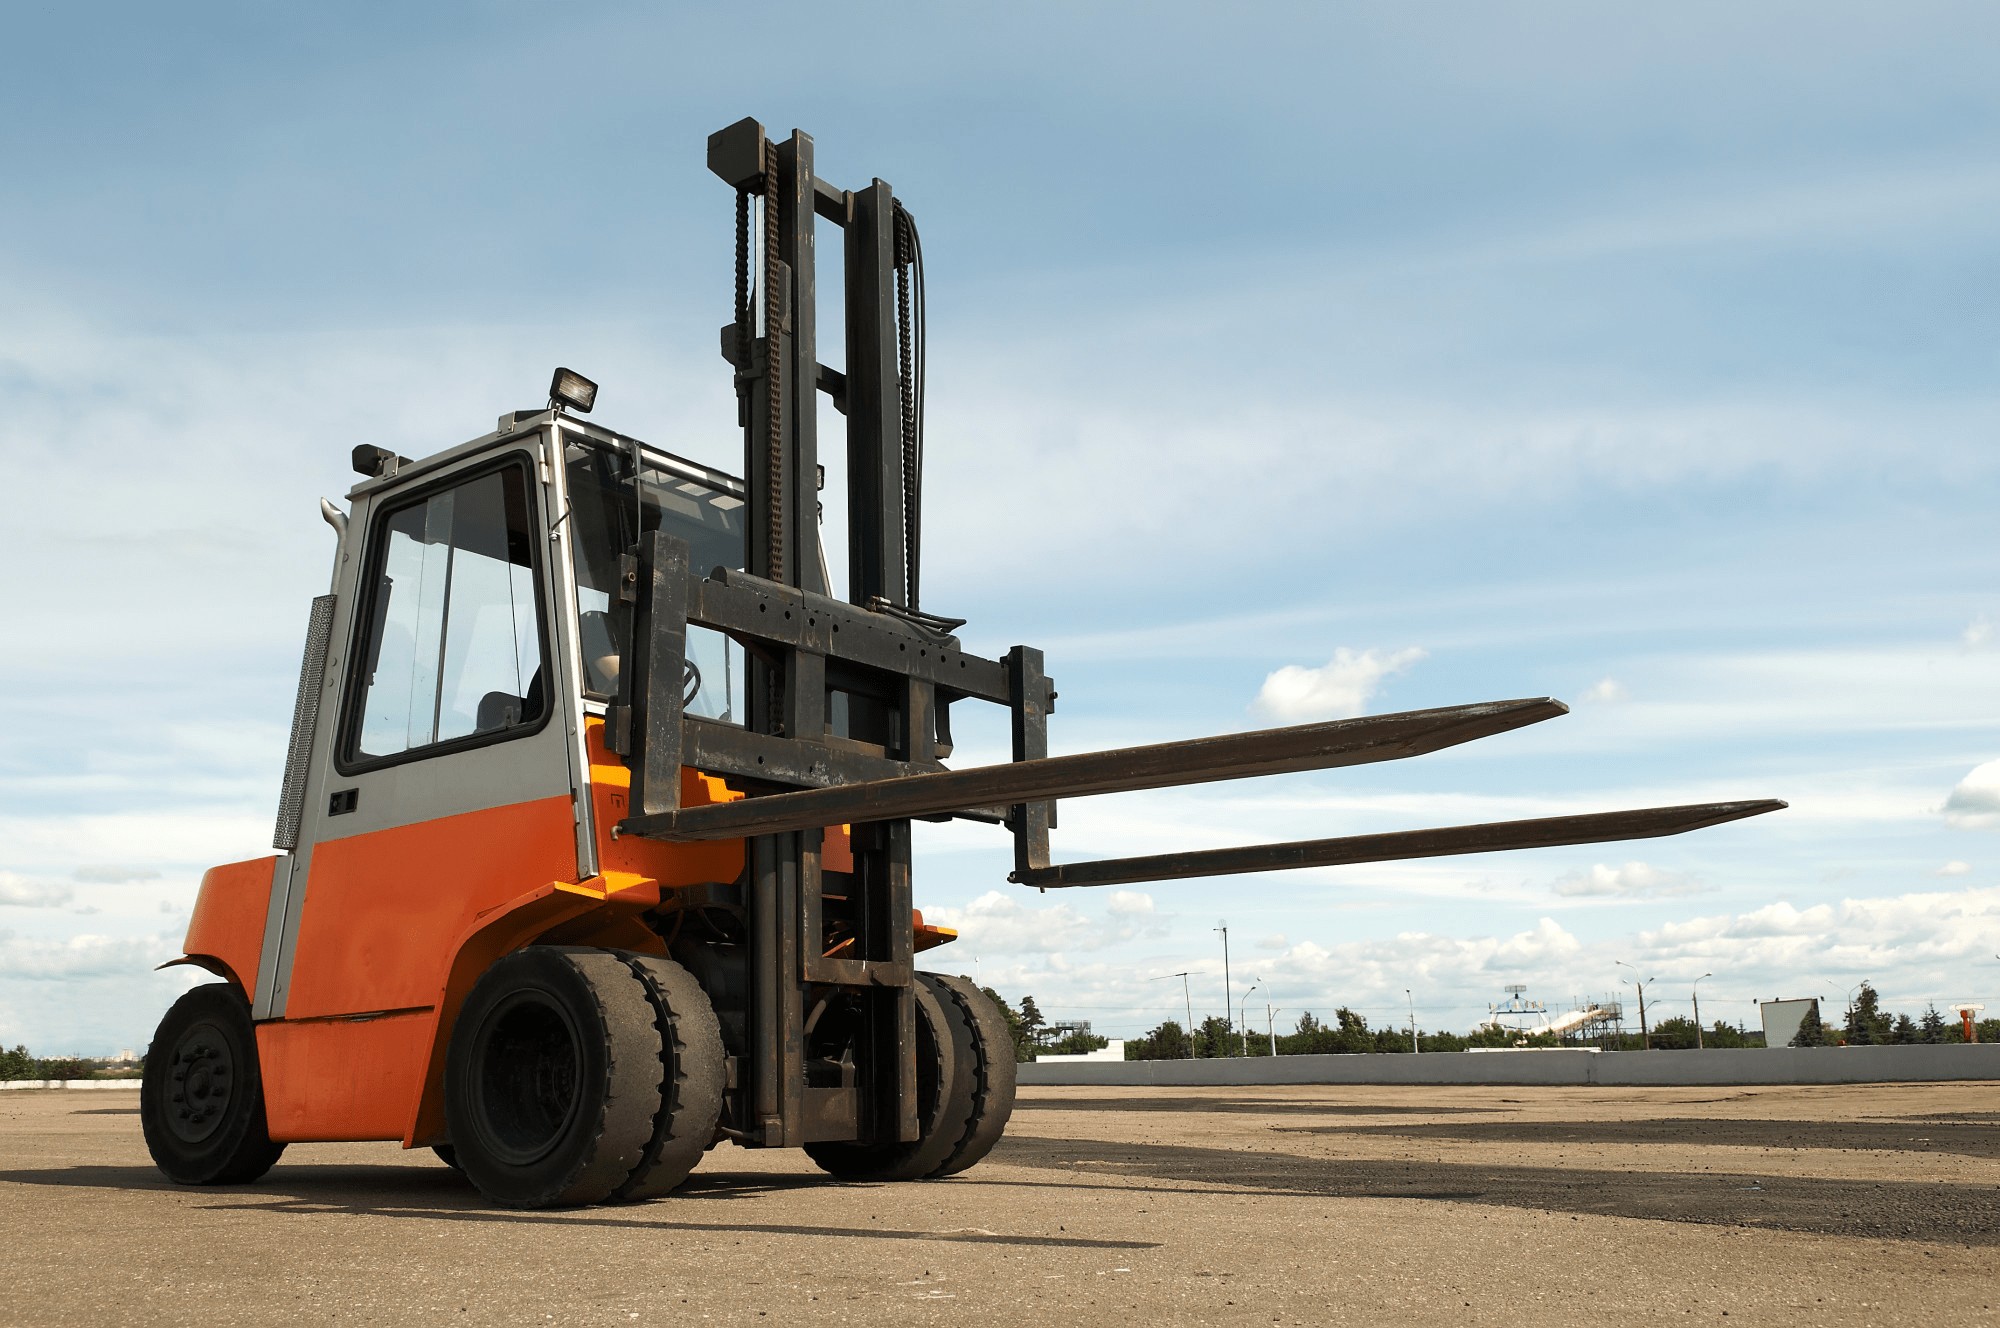 What to Consider Before Buying Used Construction Equipment